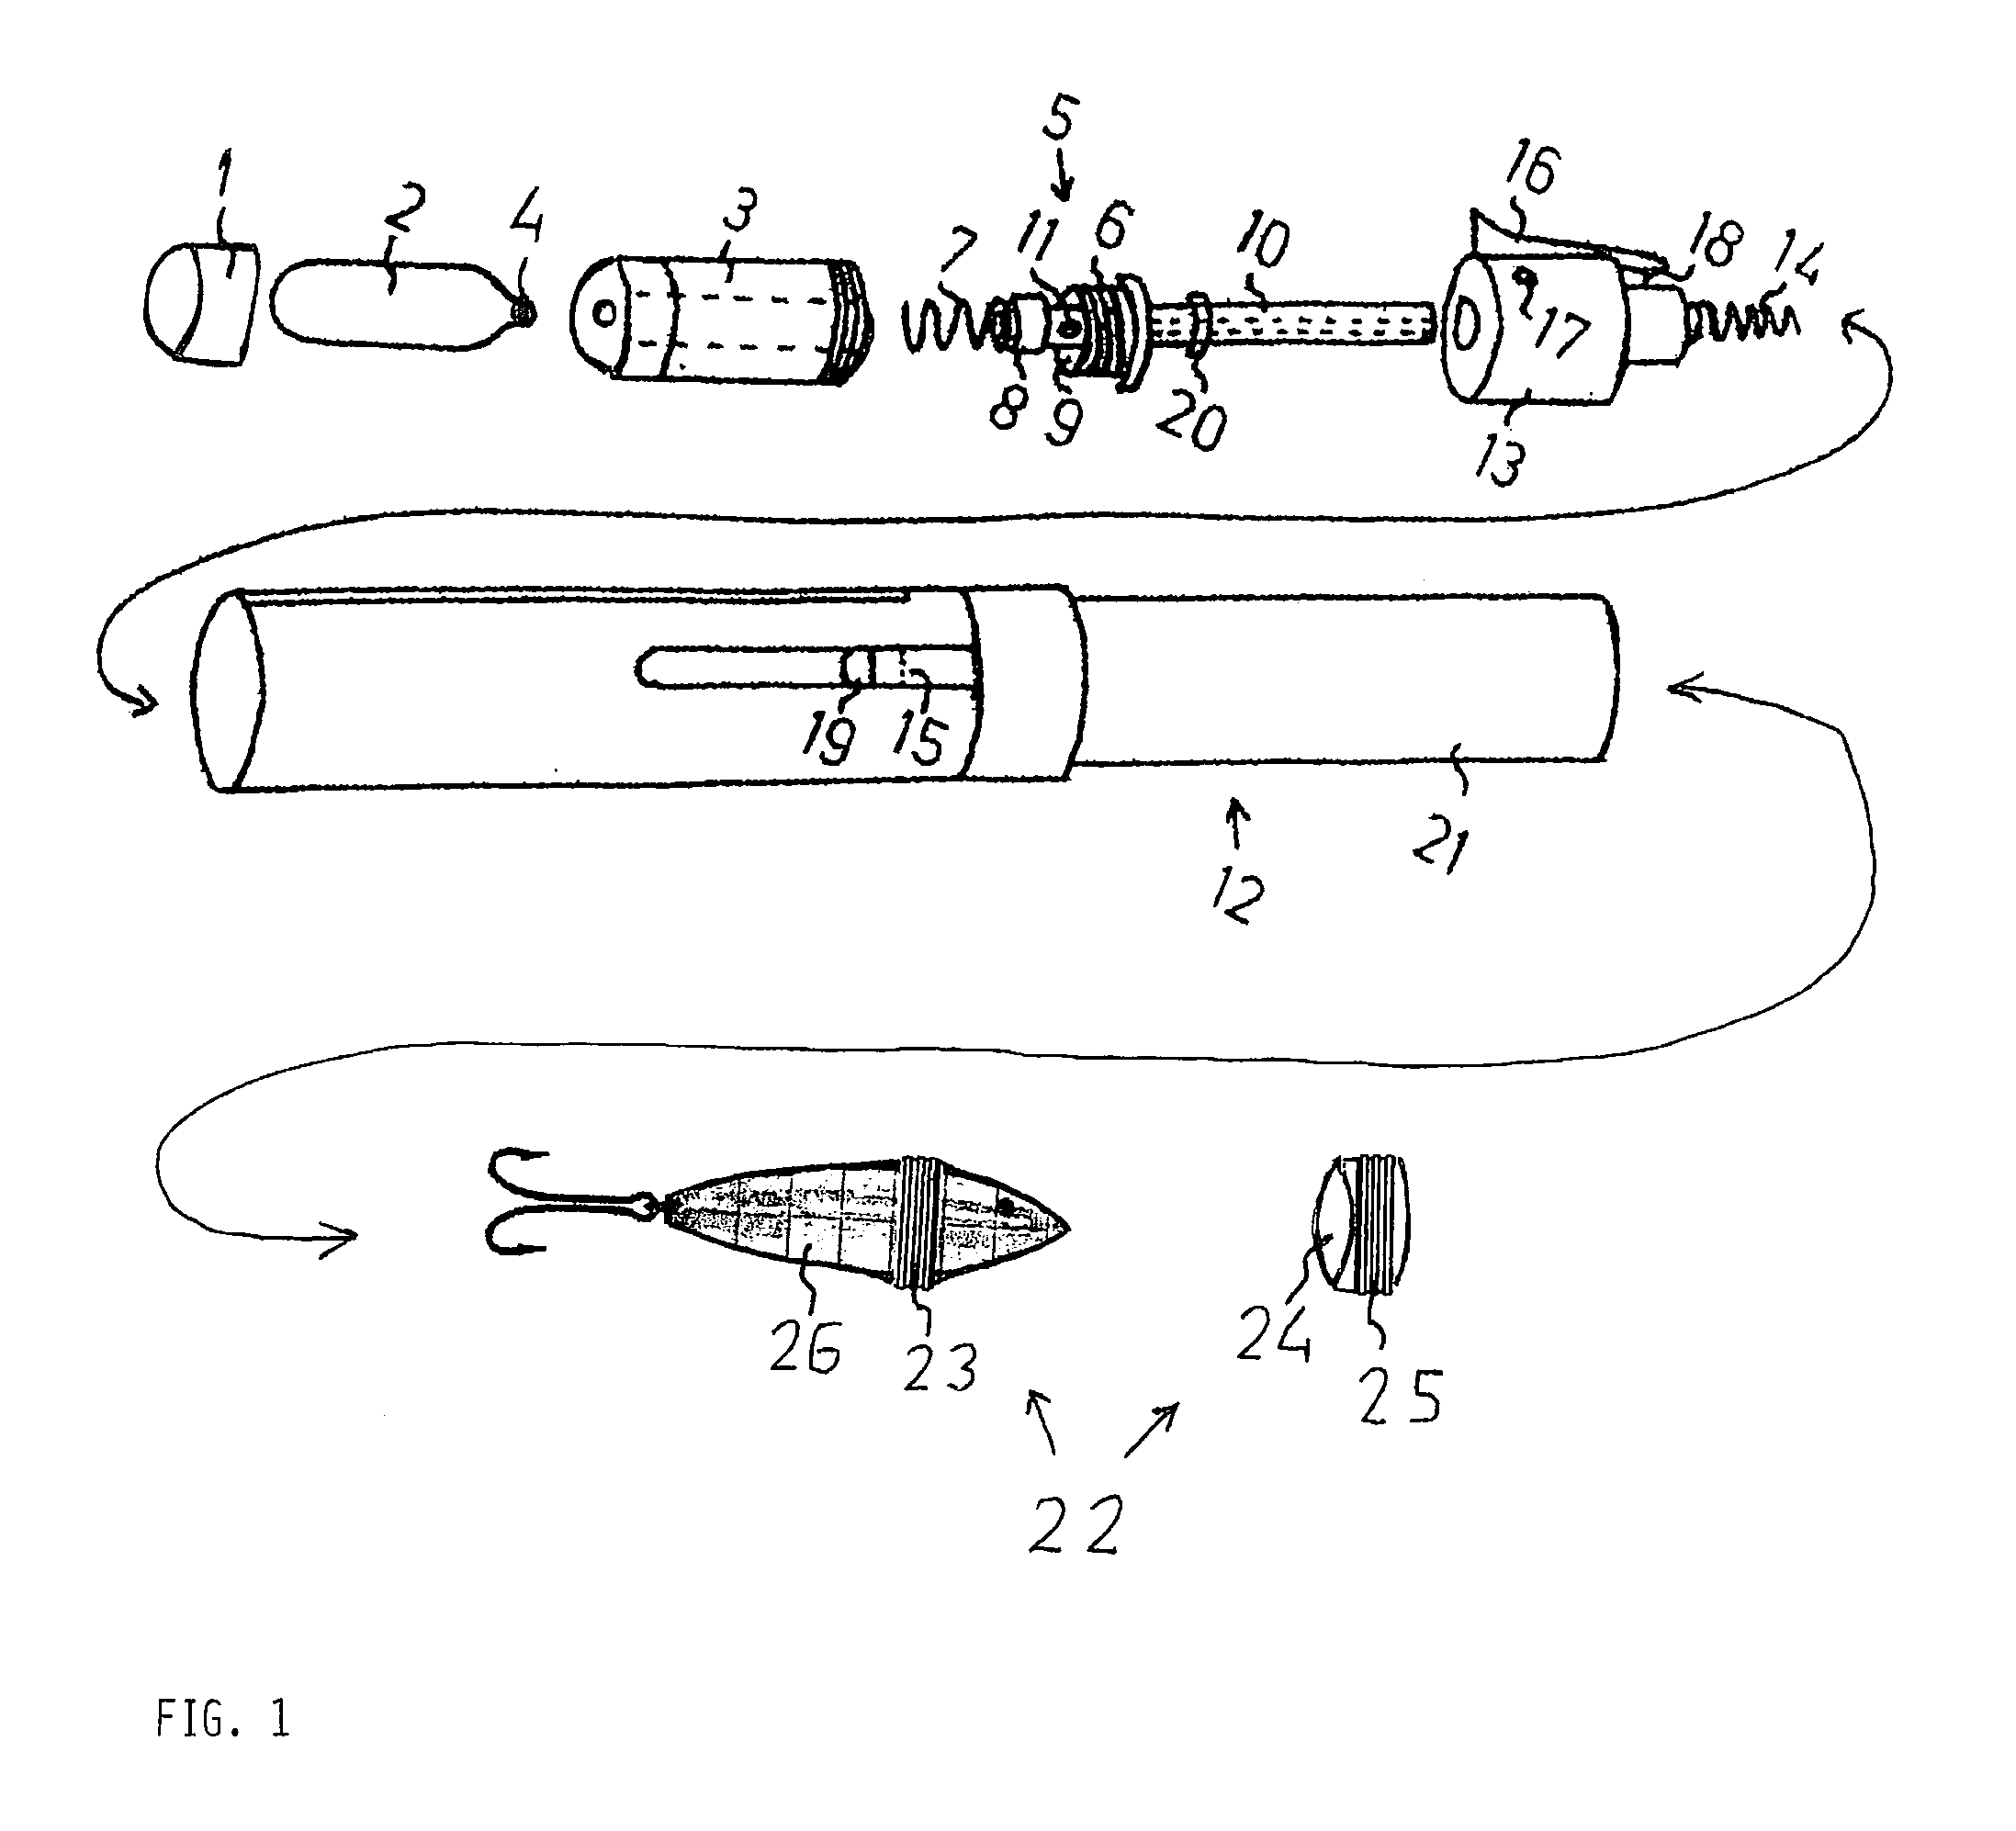 Device for fishing object ejection